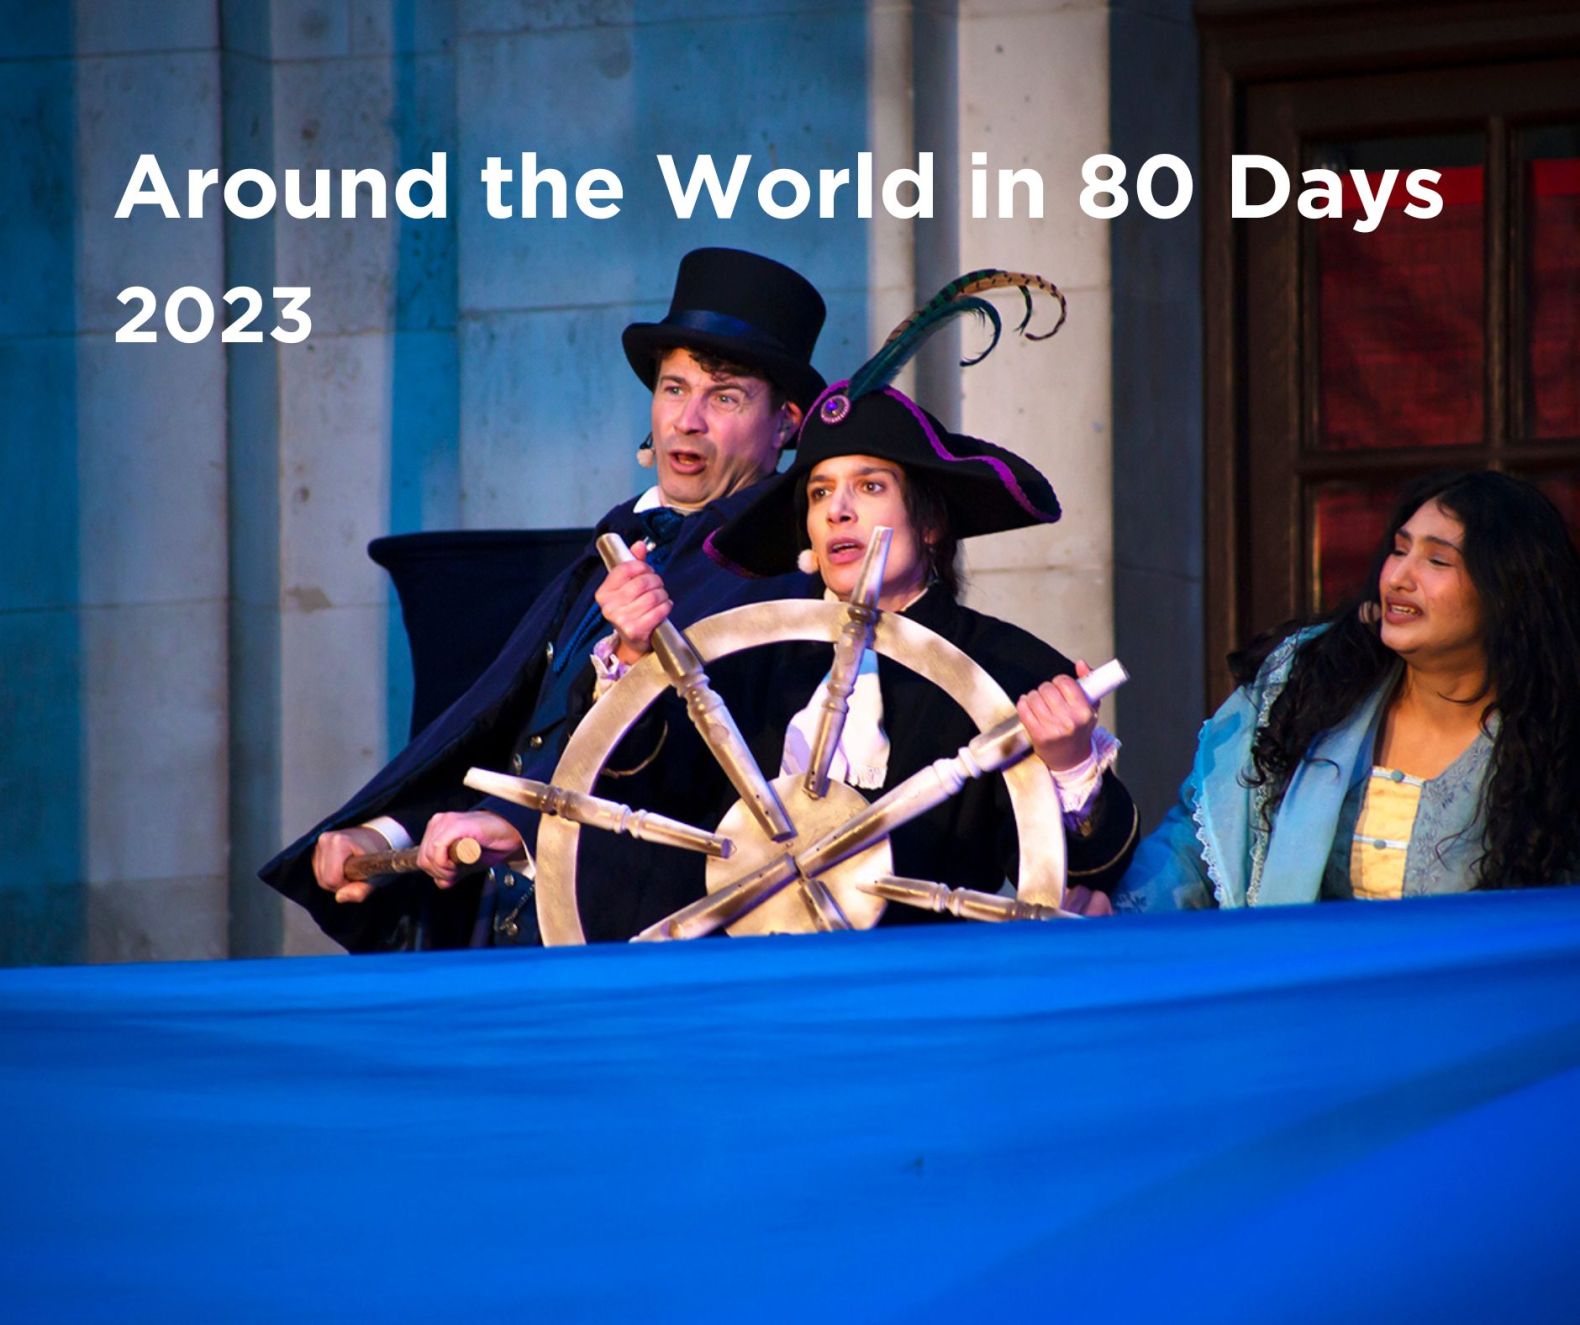 Image from Around the World in 80 Days from 2023